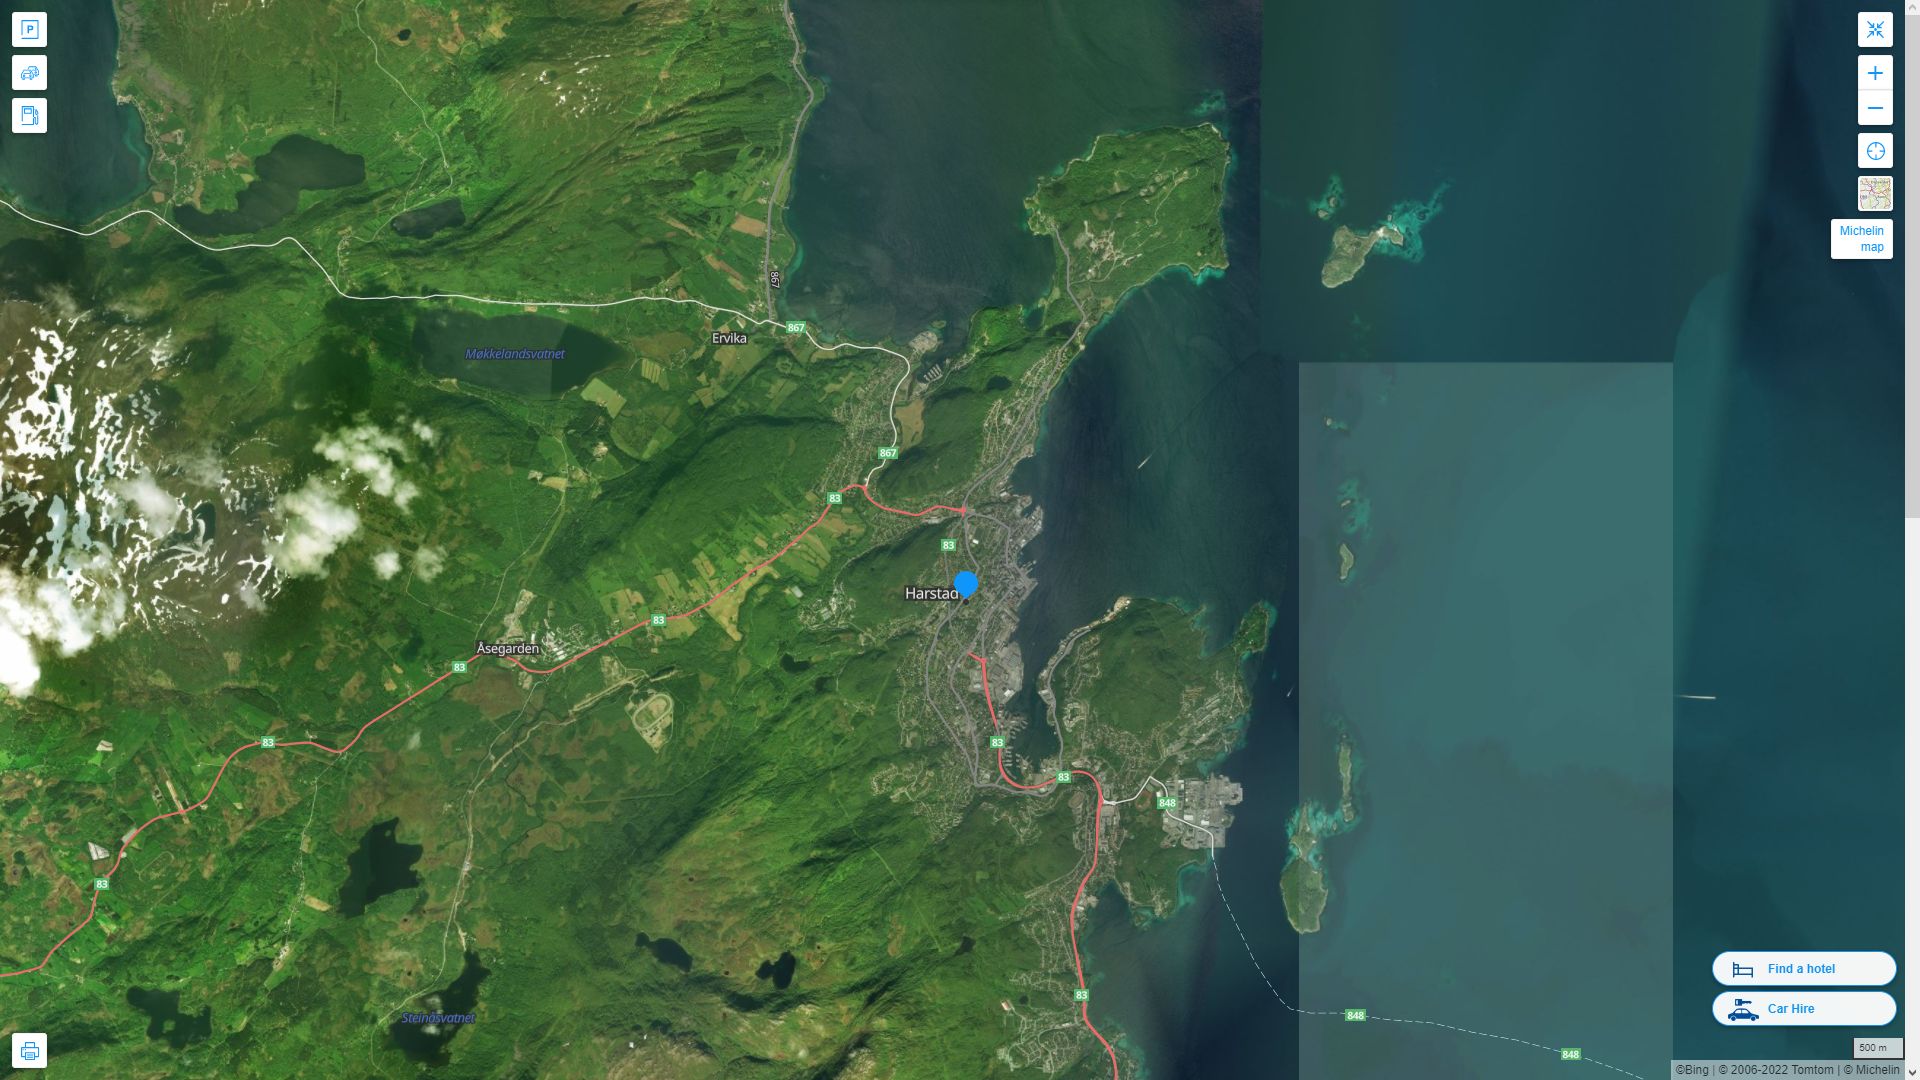 Harstad Highway and Road Map with Satellite View